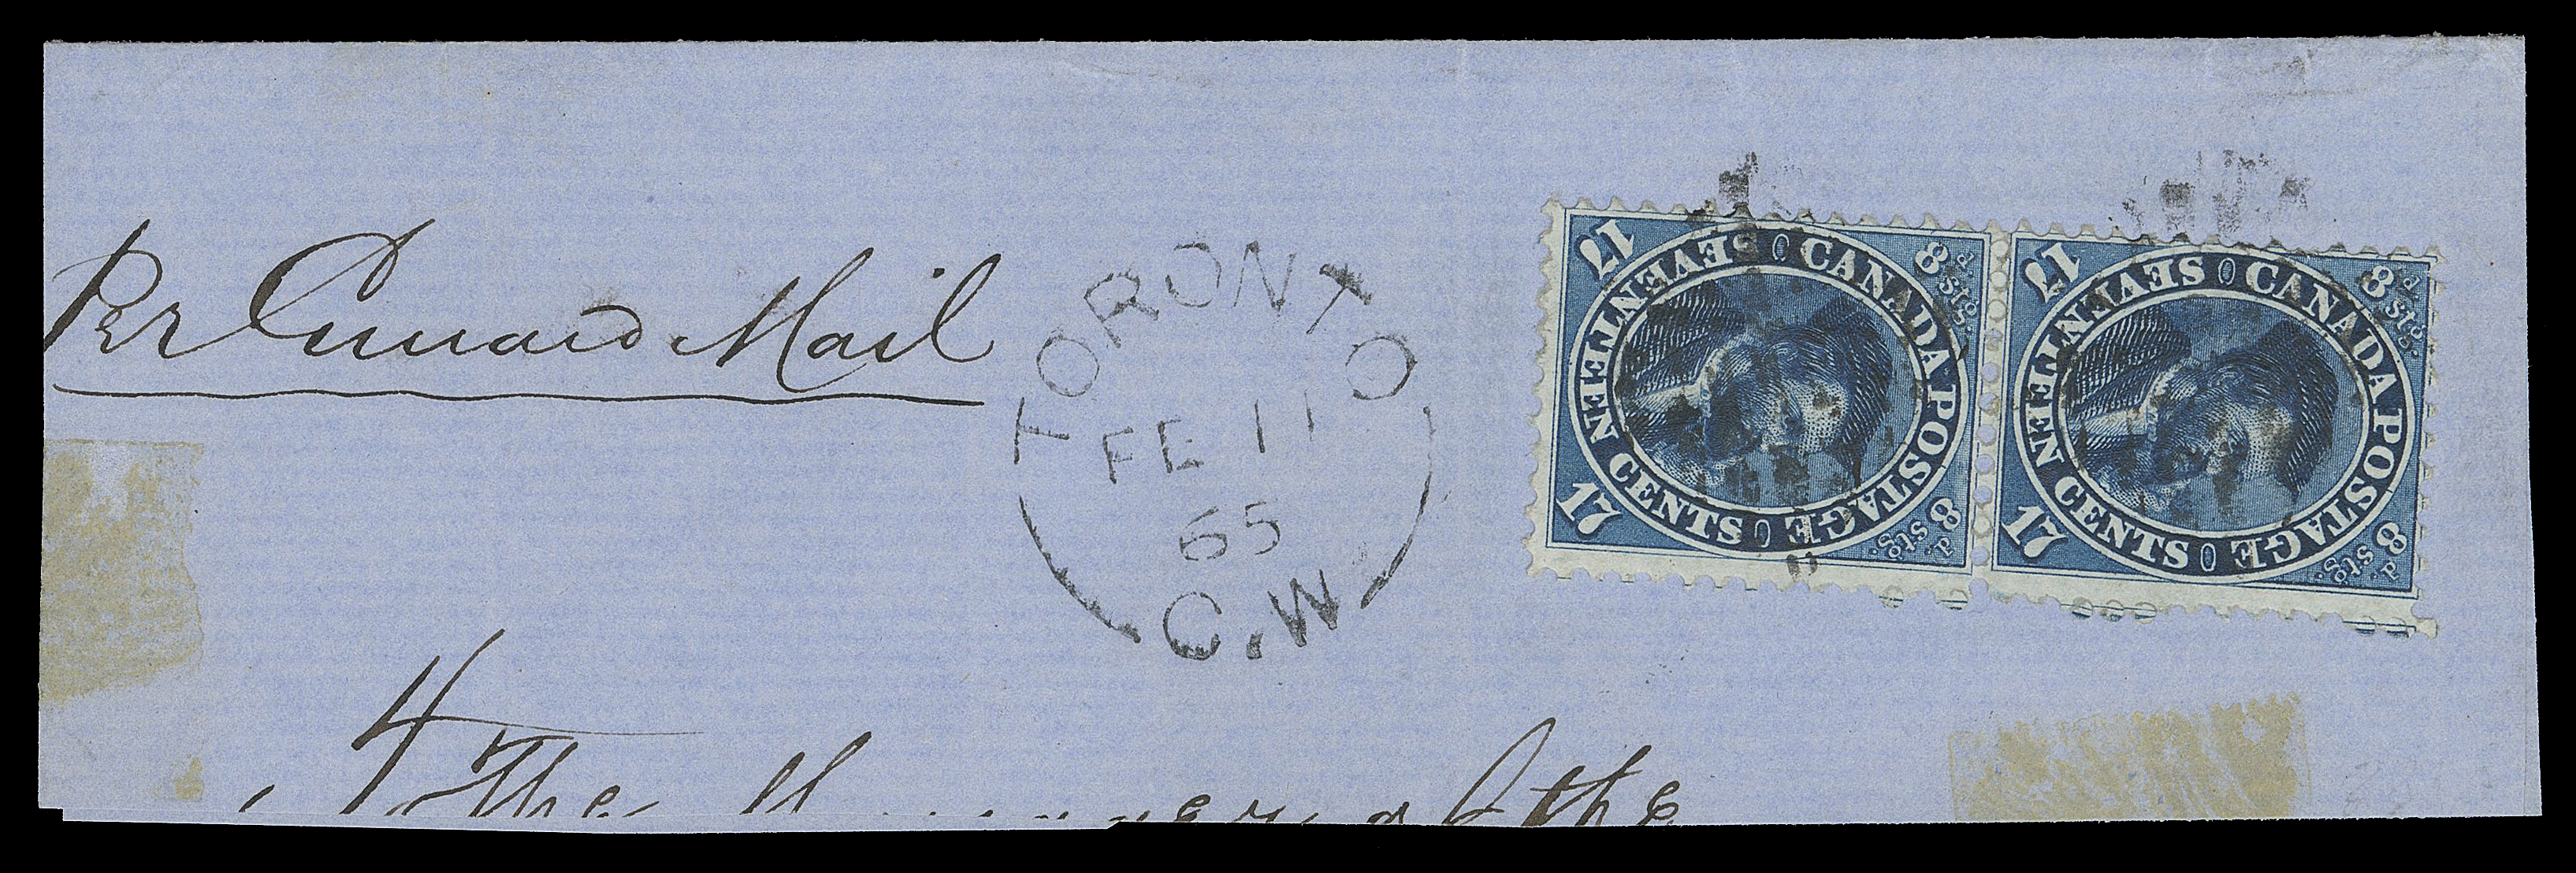 TEN PENCE AND SEVENTEEN CENTS  19i,Vertical pair with amazingly rich colour tied to cover fragment, endorsed "per Cunard Mail", tied by light diamond grid cancels, Toronto FE 11 65 split ring dispatch attractively struck at centre; the scarce Prussian blue shade from the March 1864 printing order, F-VF